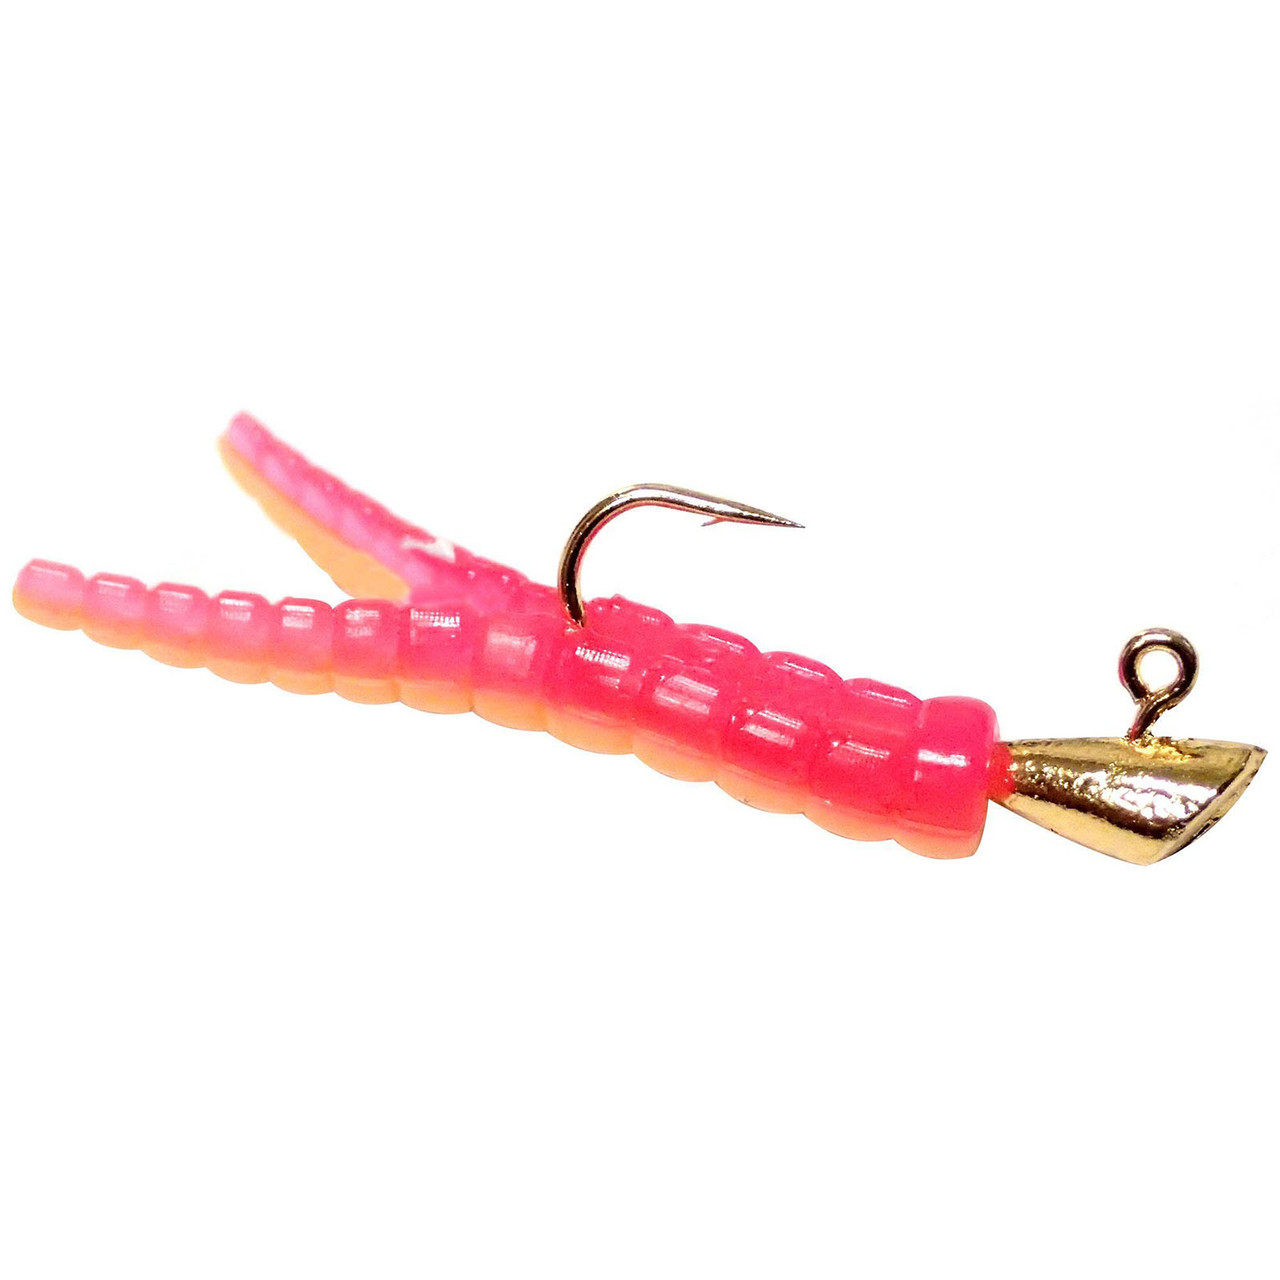 Crappie Magnet 50pc Body Pack-Orange/Chartreuse